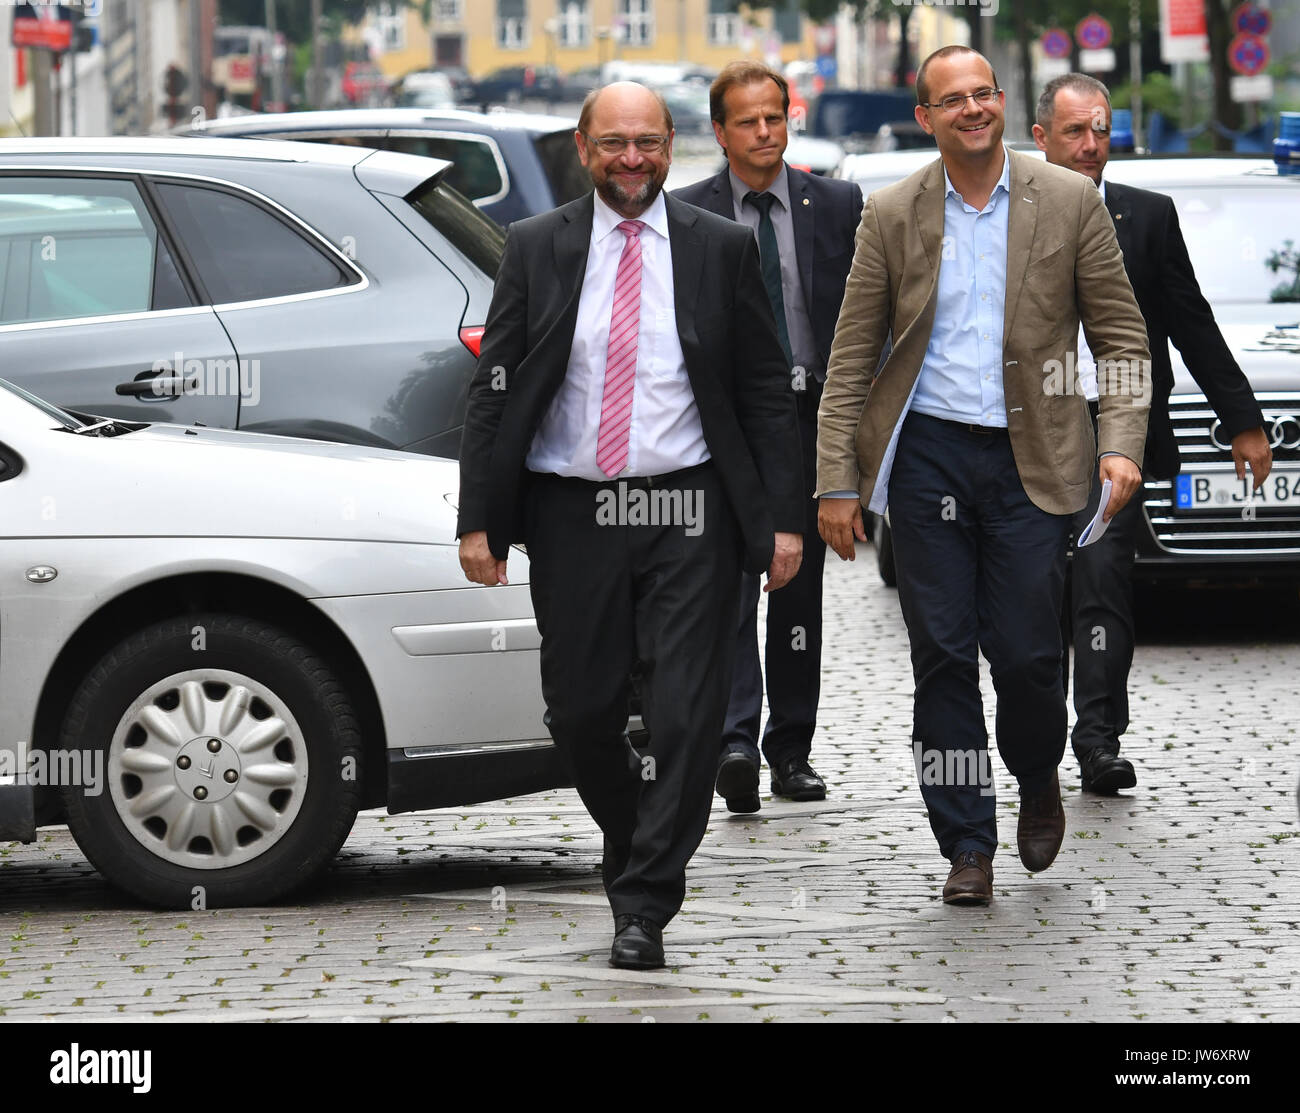 Berlin, Germany. 11th Aug, 2017. The SPD's candidate for Chancellor, Martin Schulz, arrives to press conference regarding the German automotive industry in Berlin, Germany, 11 August 2017. The SPD called for an EU quota for electric autos during the debate regarding diesel emissions and looming auto bans. Photo: Paul Zinken/dpa/Alamy Live News Stock Photo